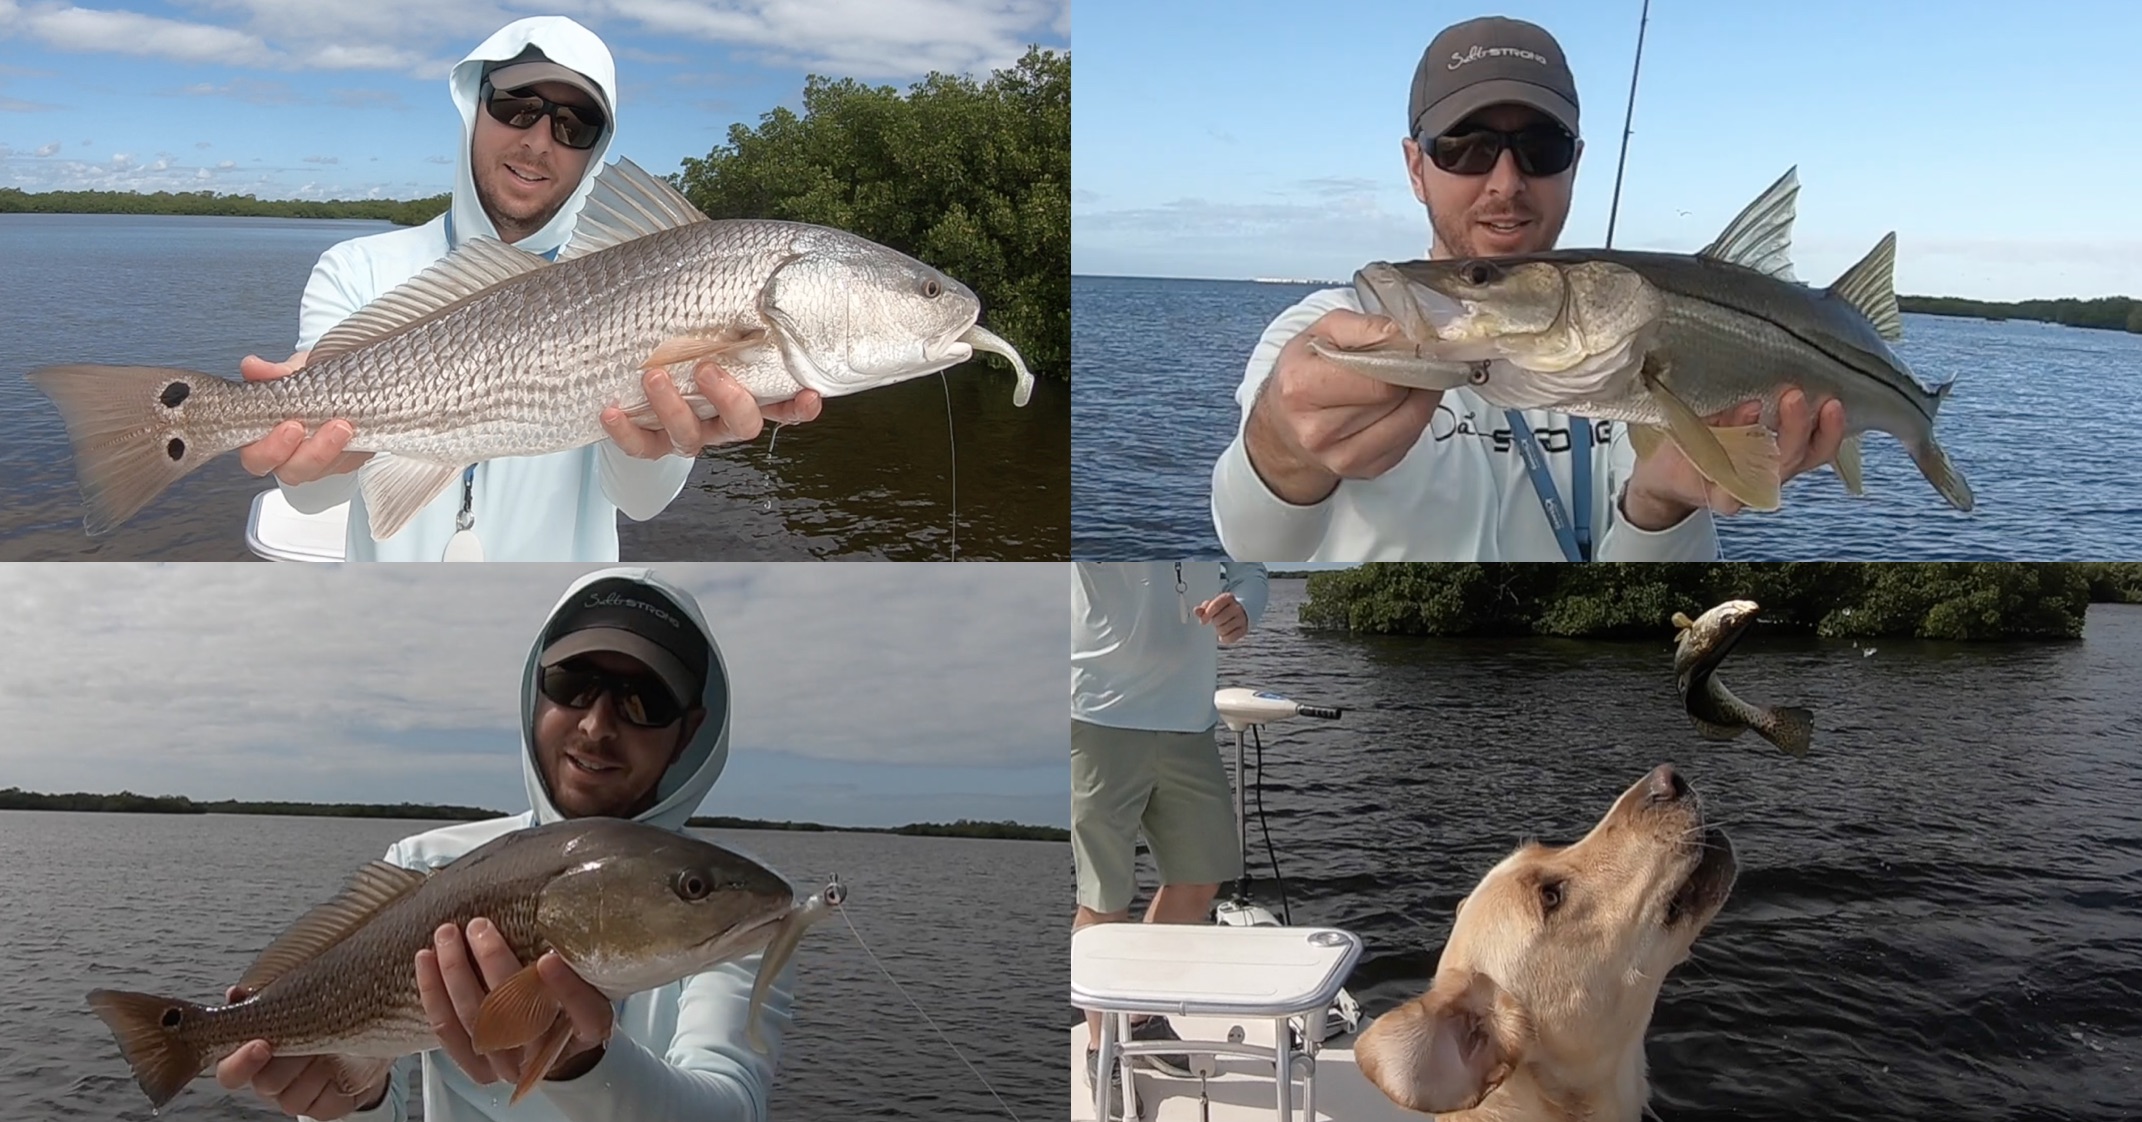 http://tip%20for%20catching%20redfish%20and%20snook